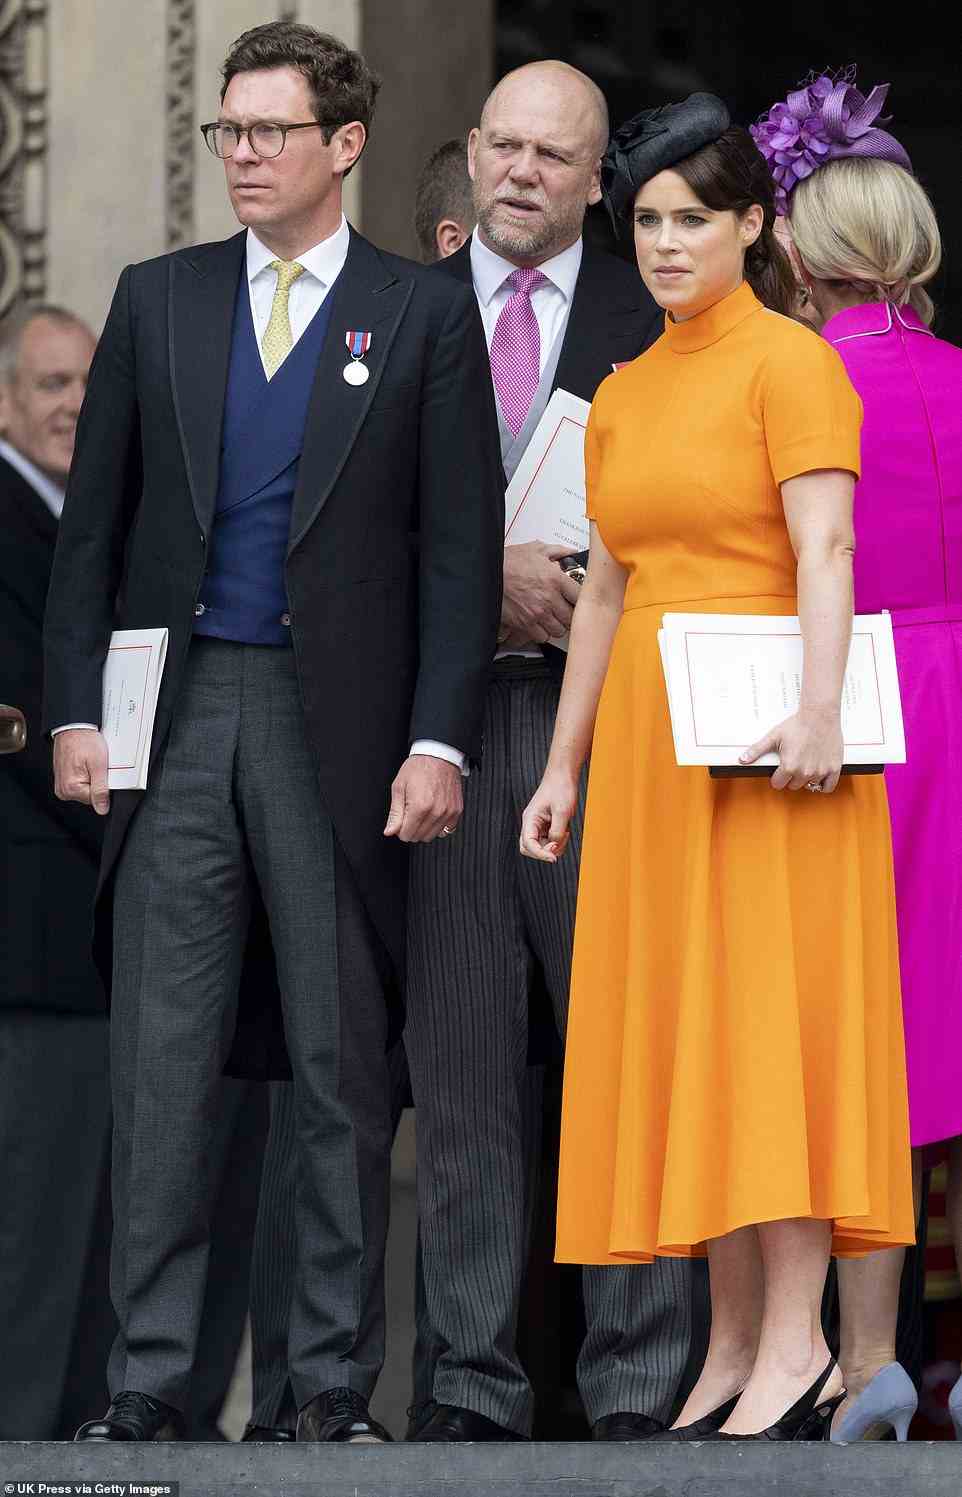 Images from Friday's thanksgiving service at St Paul's show Mike with Princess Eugenie (pictured, right, with her husband Jack Brooksbank, left). He later poked fun at her vibrant orange outfit